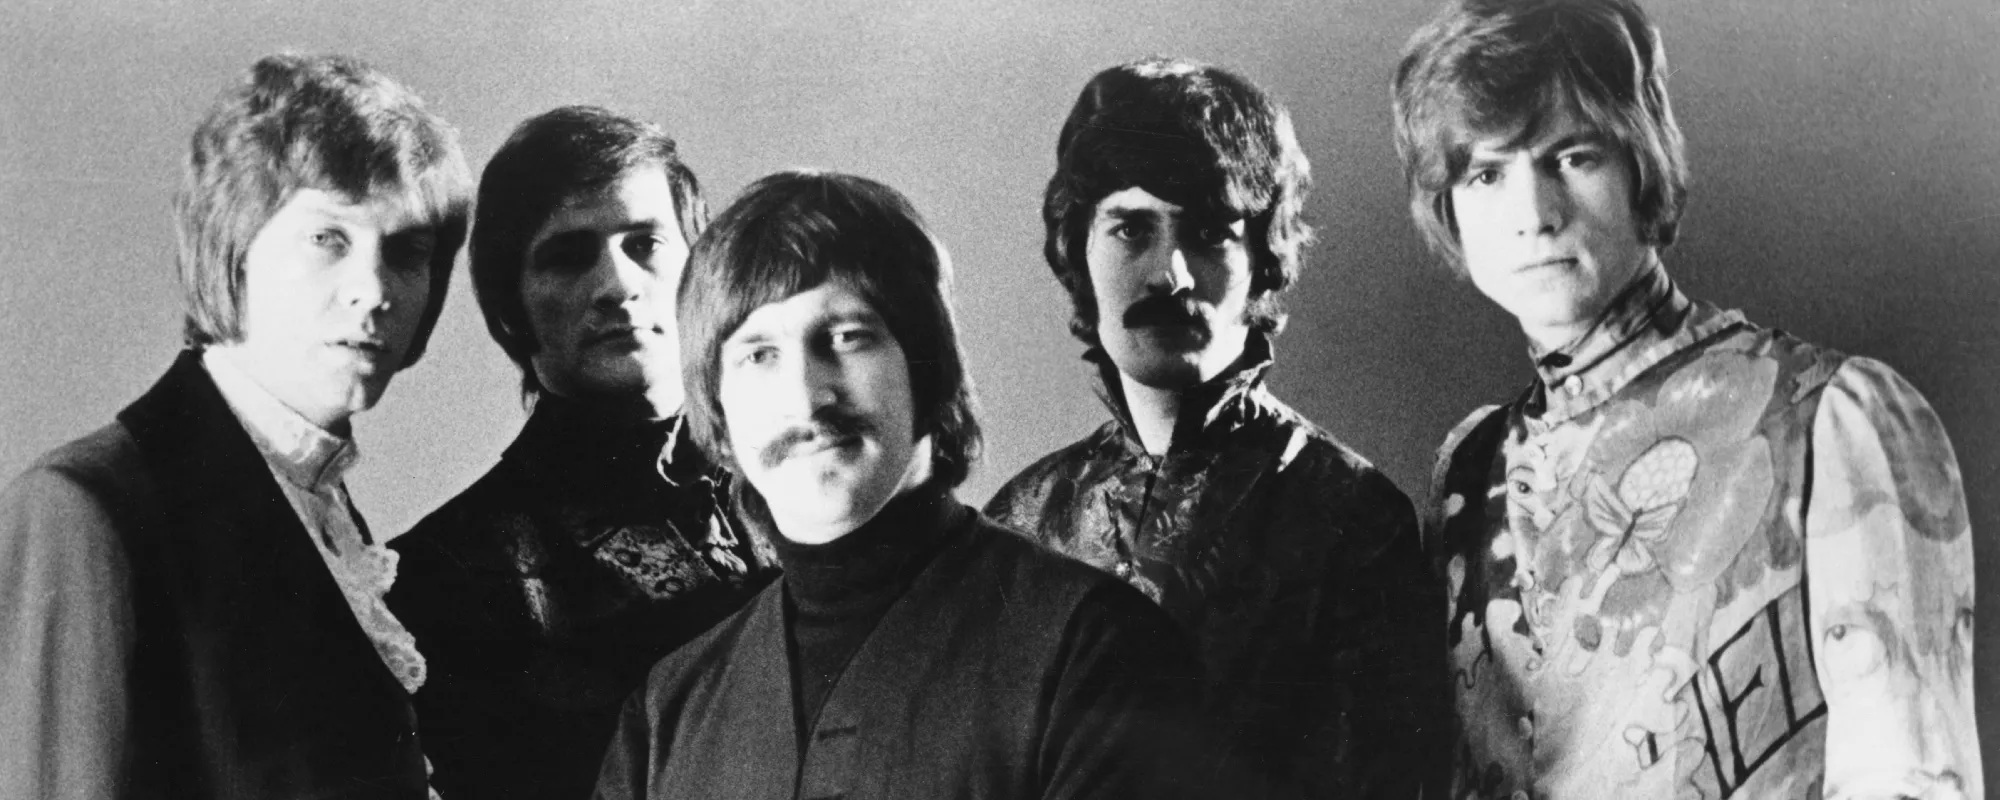 The Meaning Behind “Question” by The Moody Blues and How Their Audience Inspired Its Creation